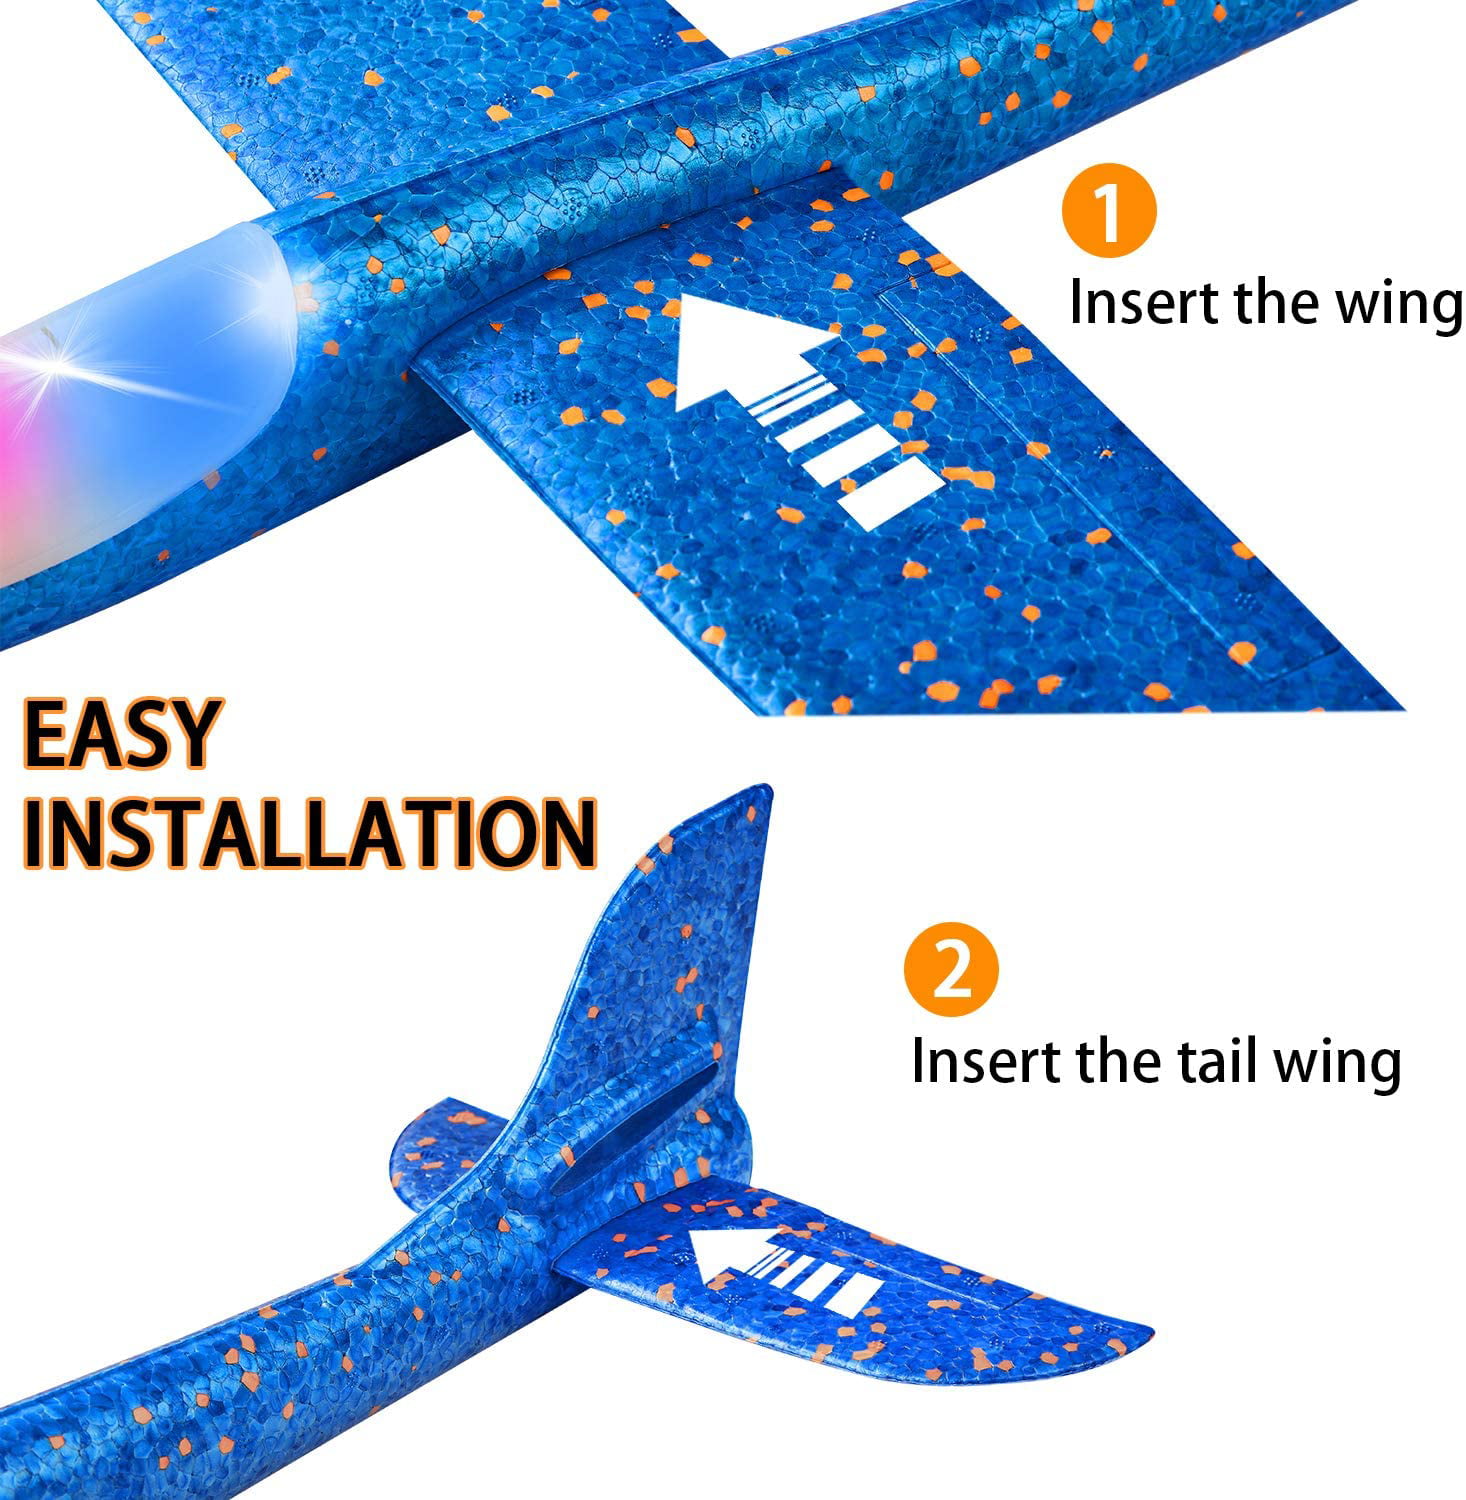 YESMAEA Airplane Toys Foam Glider Style Model Outdoor Sports Toys Birthday Party Favor Gift for Kids,Large Blue Color